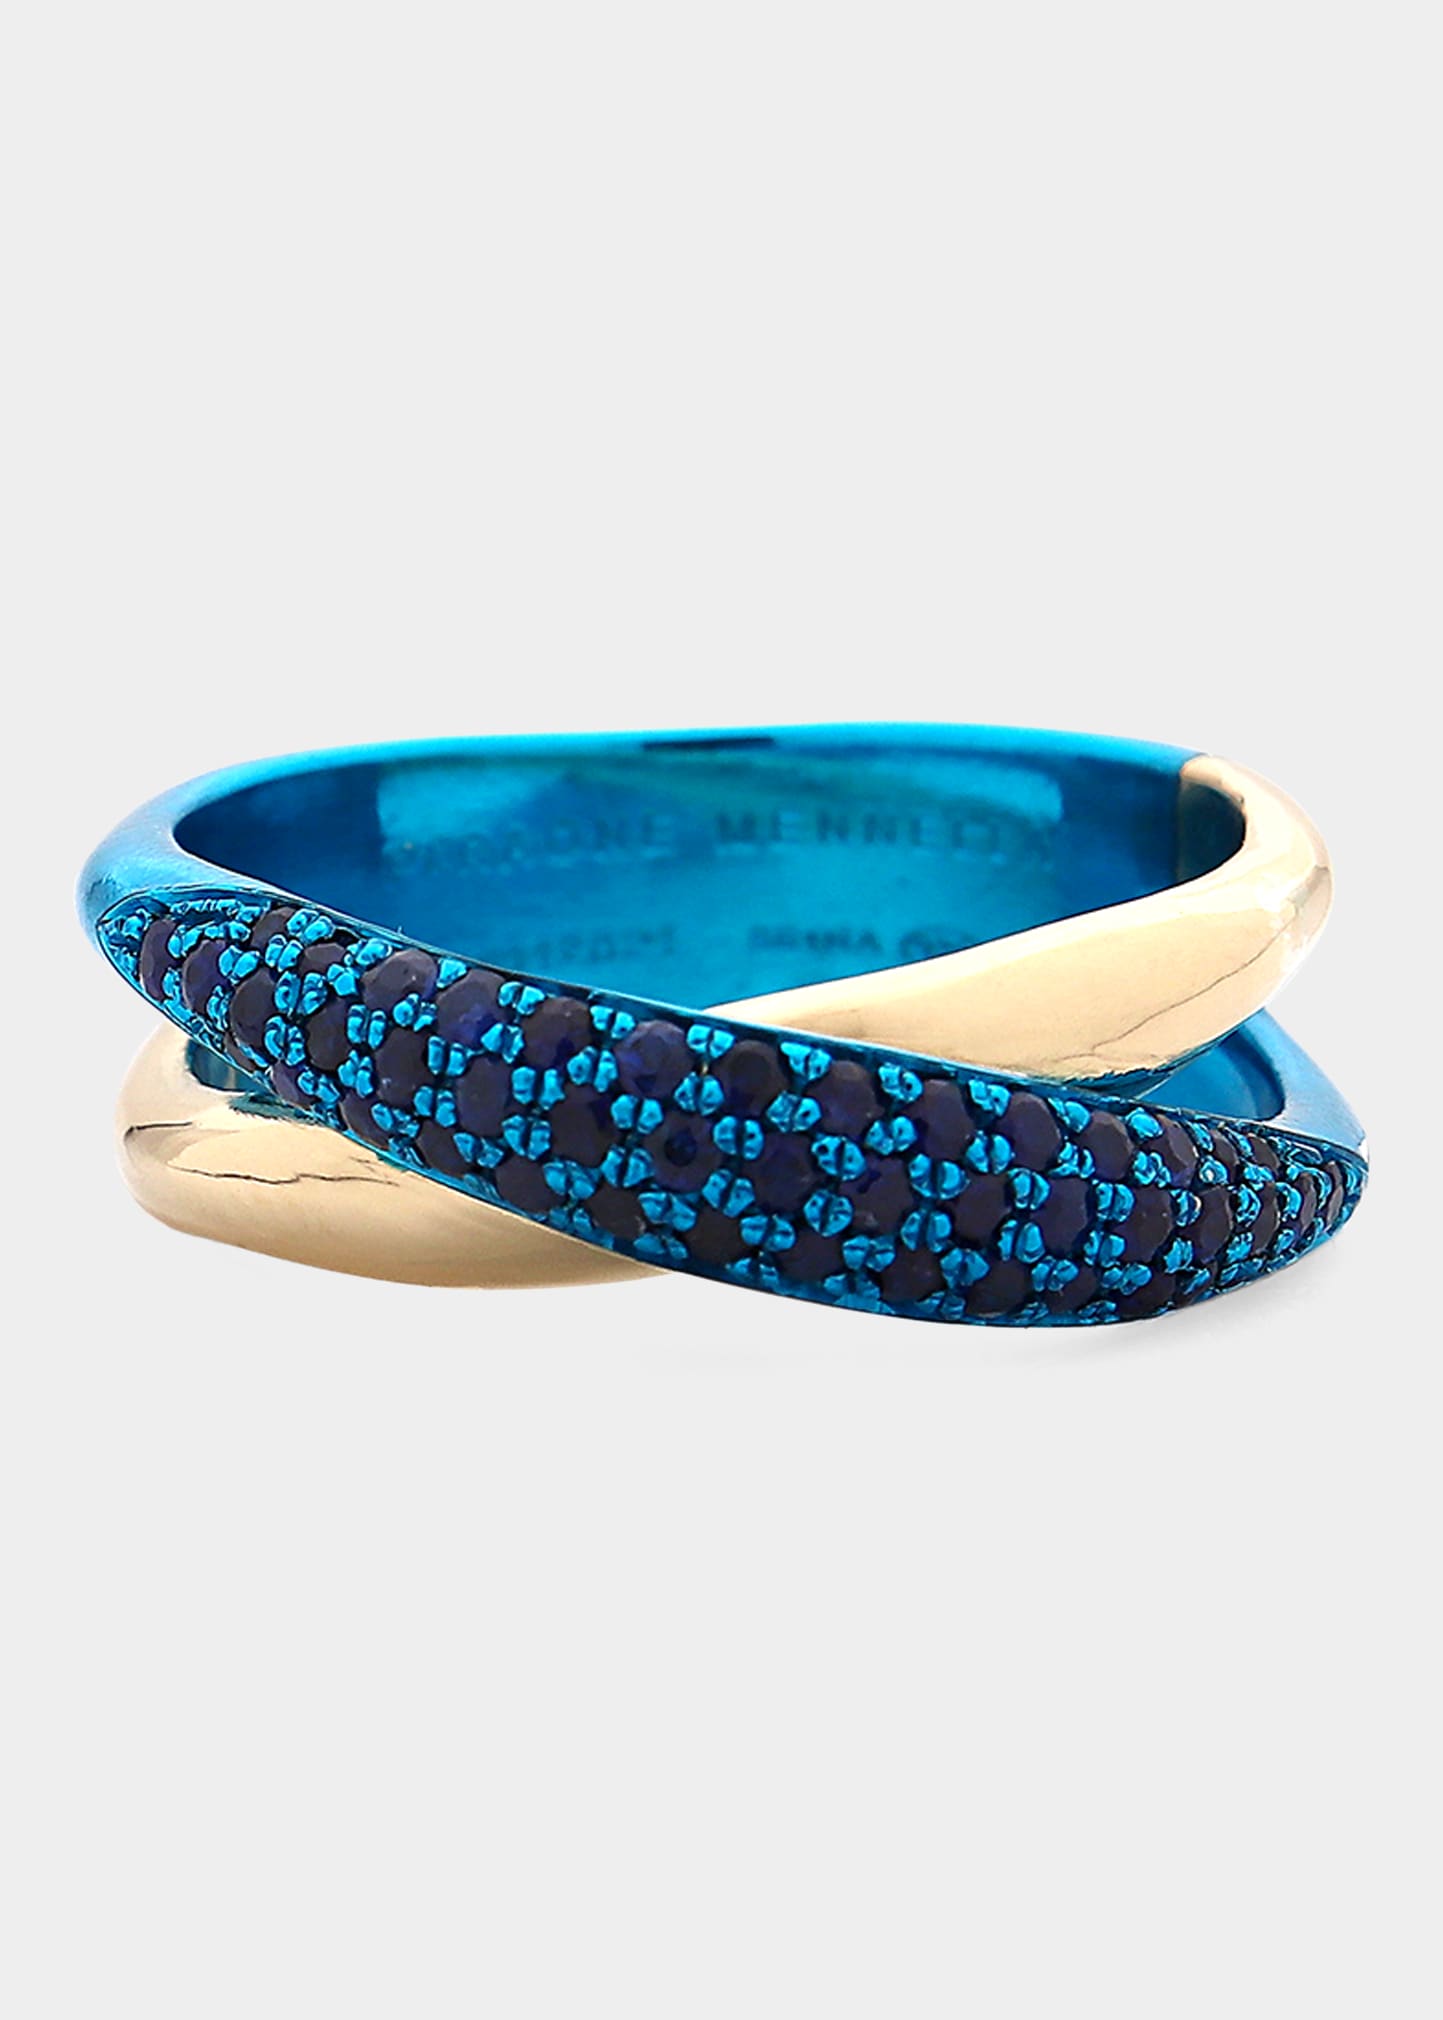 Margaux Ring in 18K Gold, Sterling Silver and Aqua Blue Sapphires